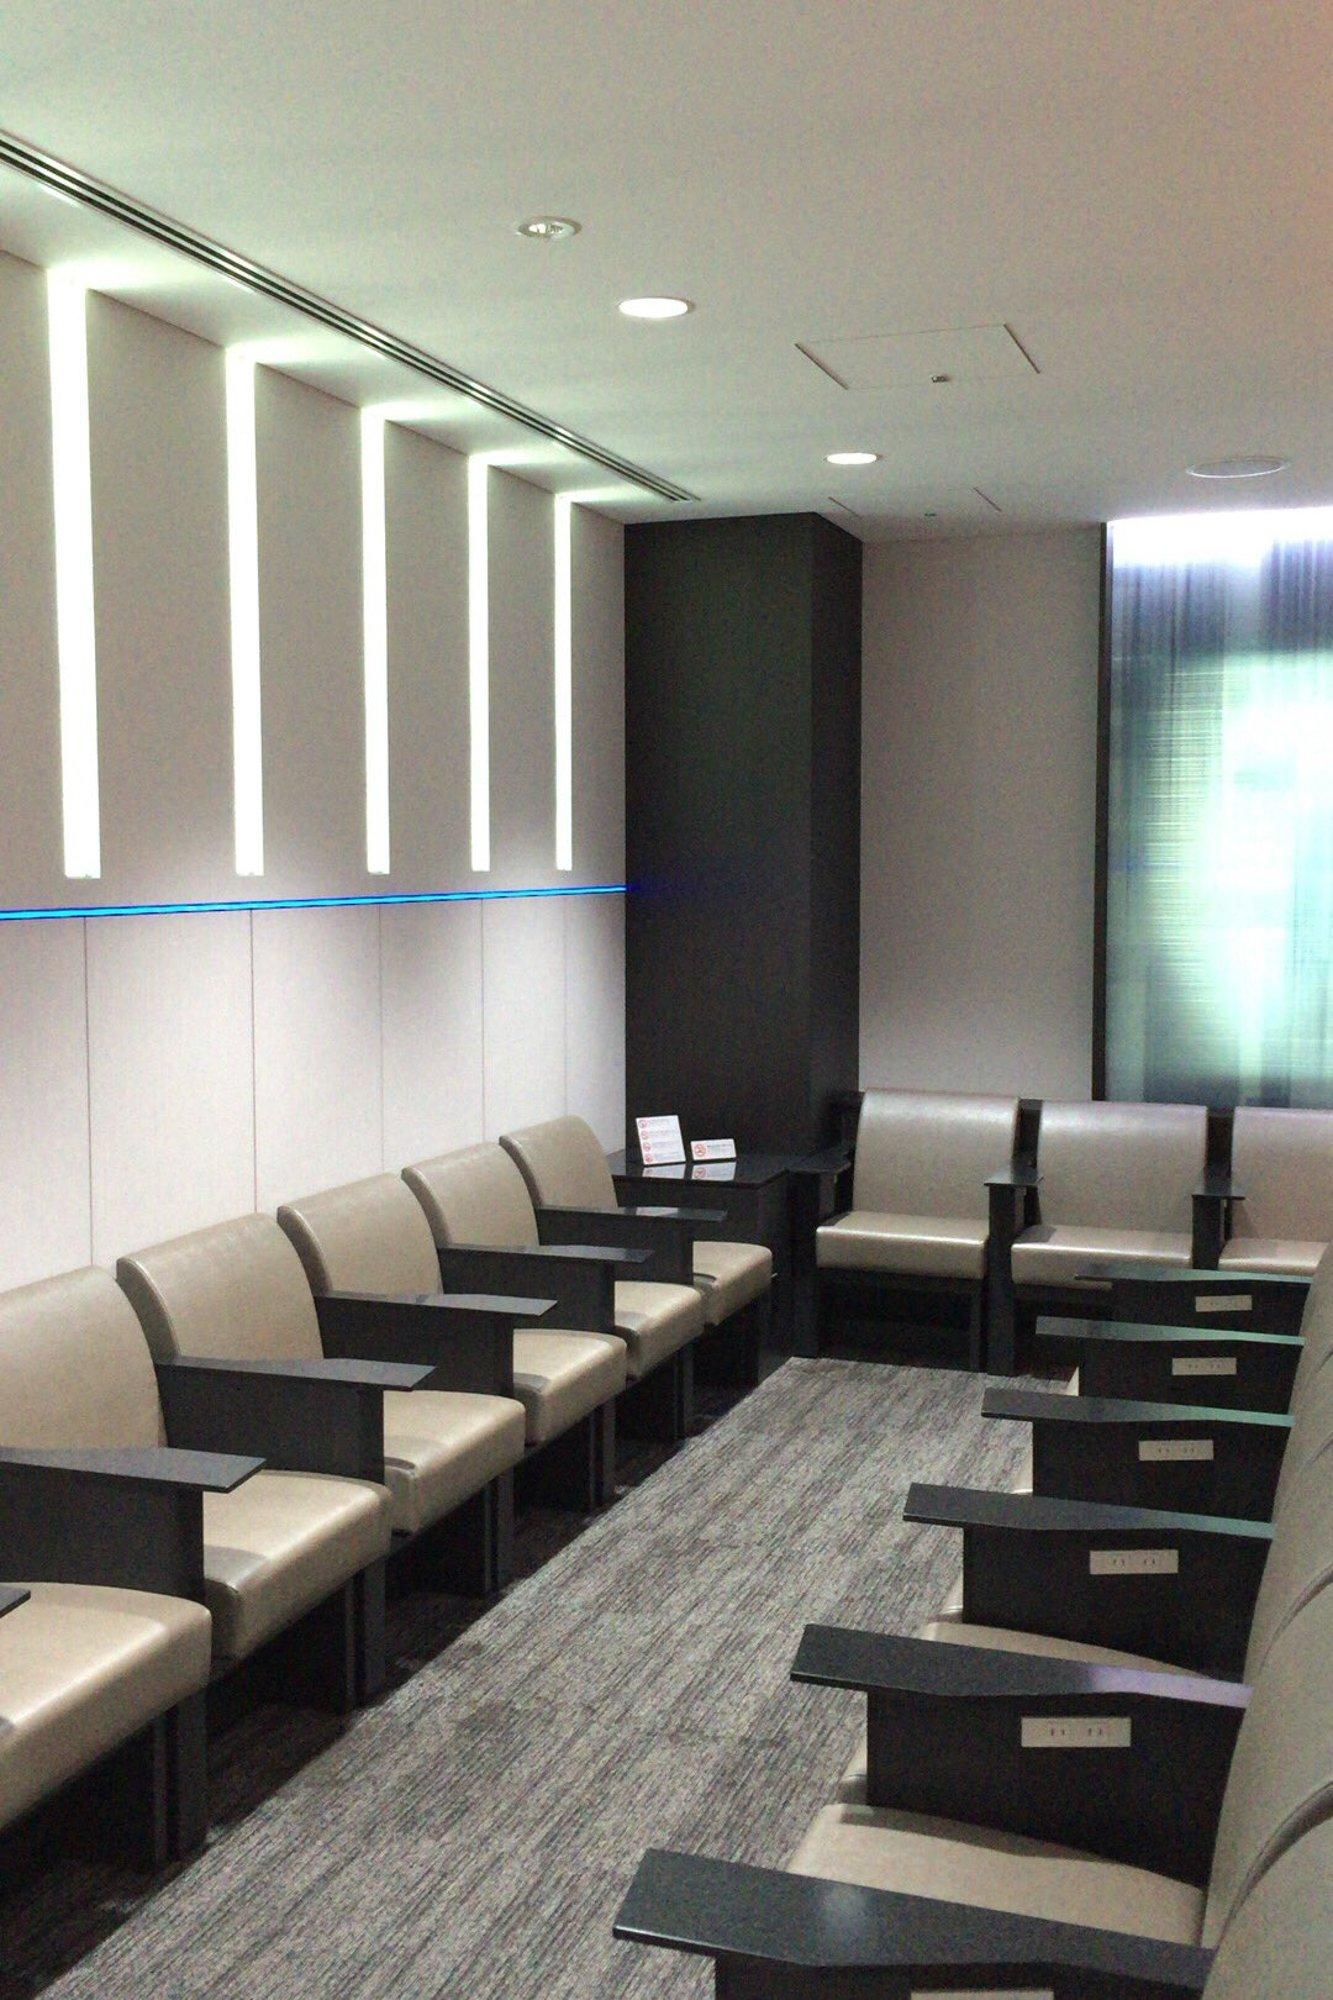 All Nippon Airways ANA Lounge image 5 of 9